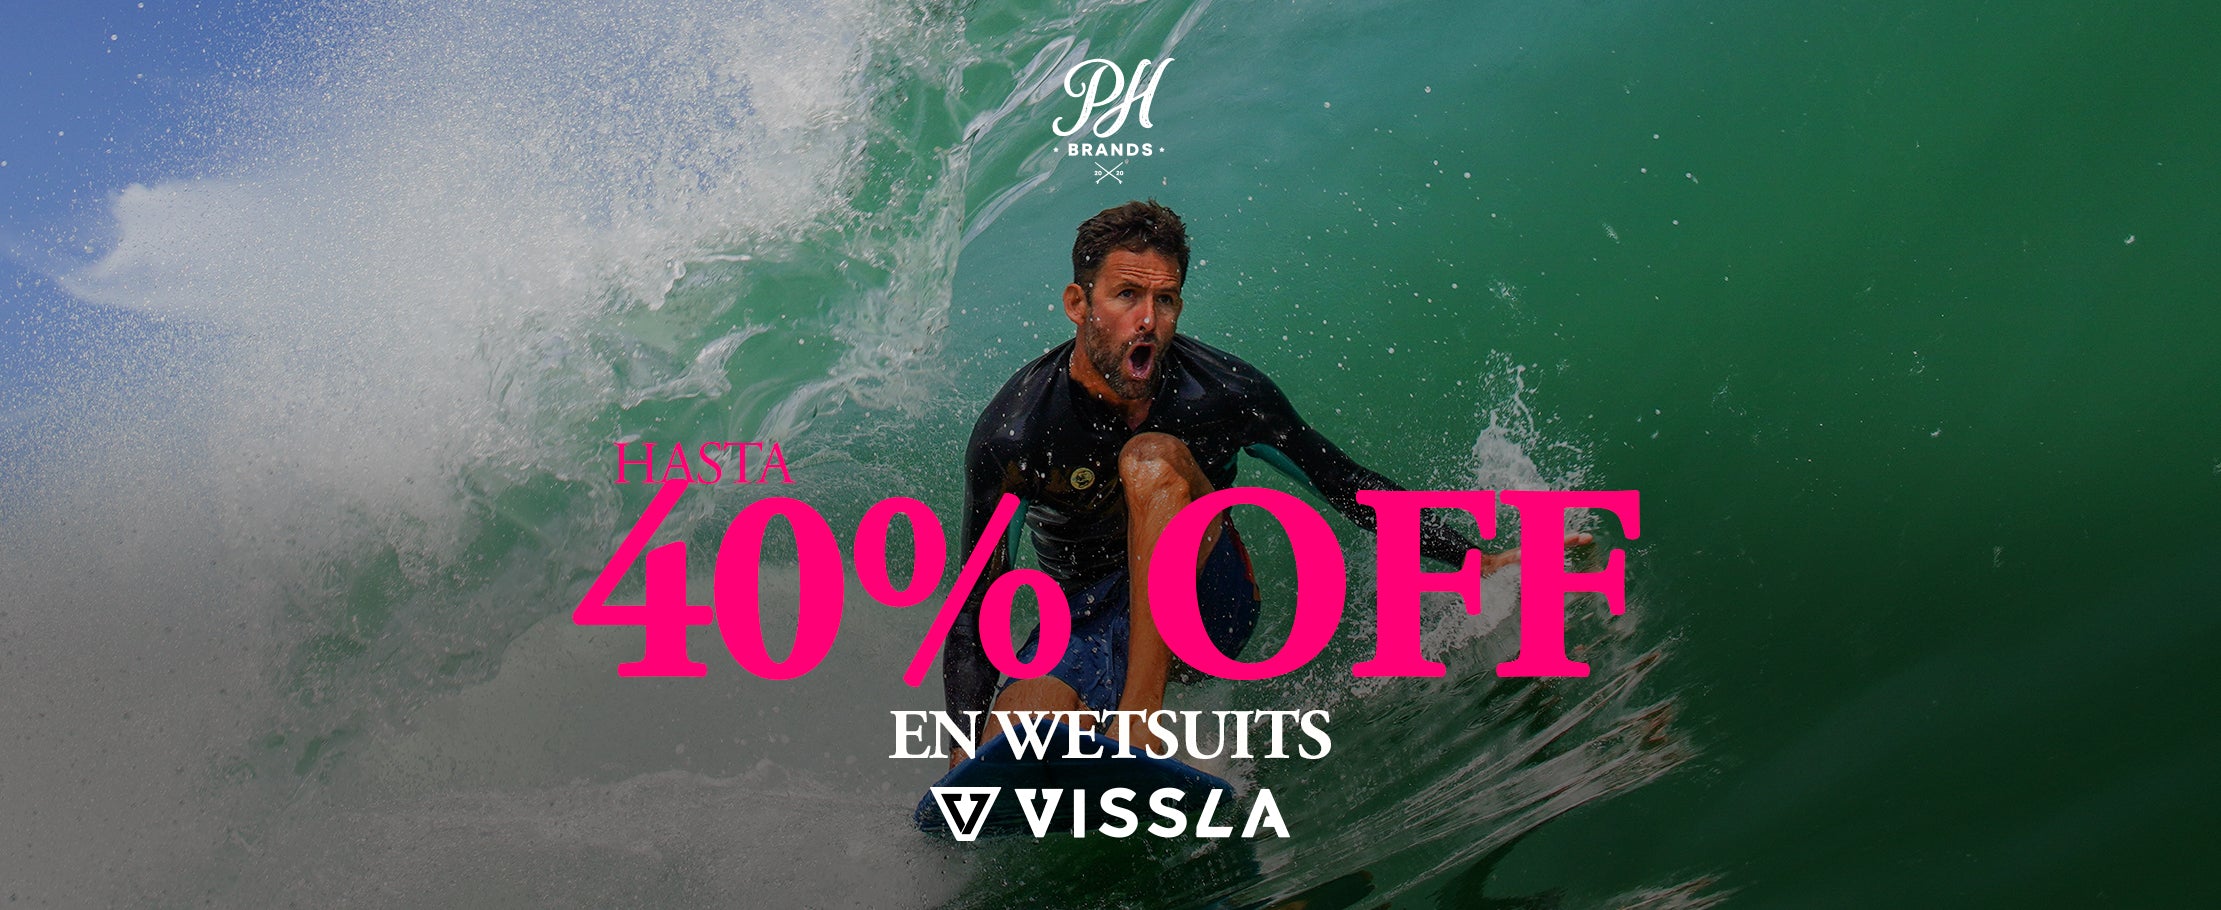 Ph wetsuits banner web 40